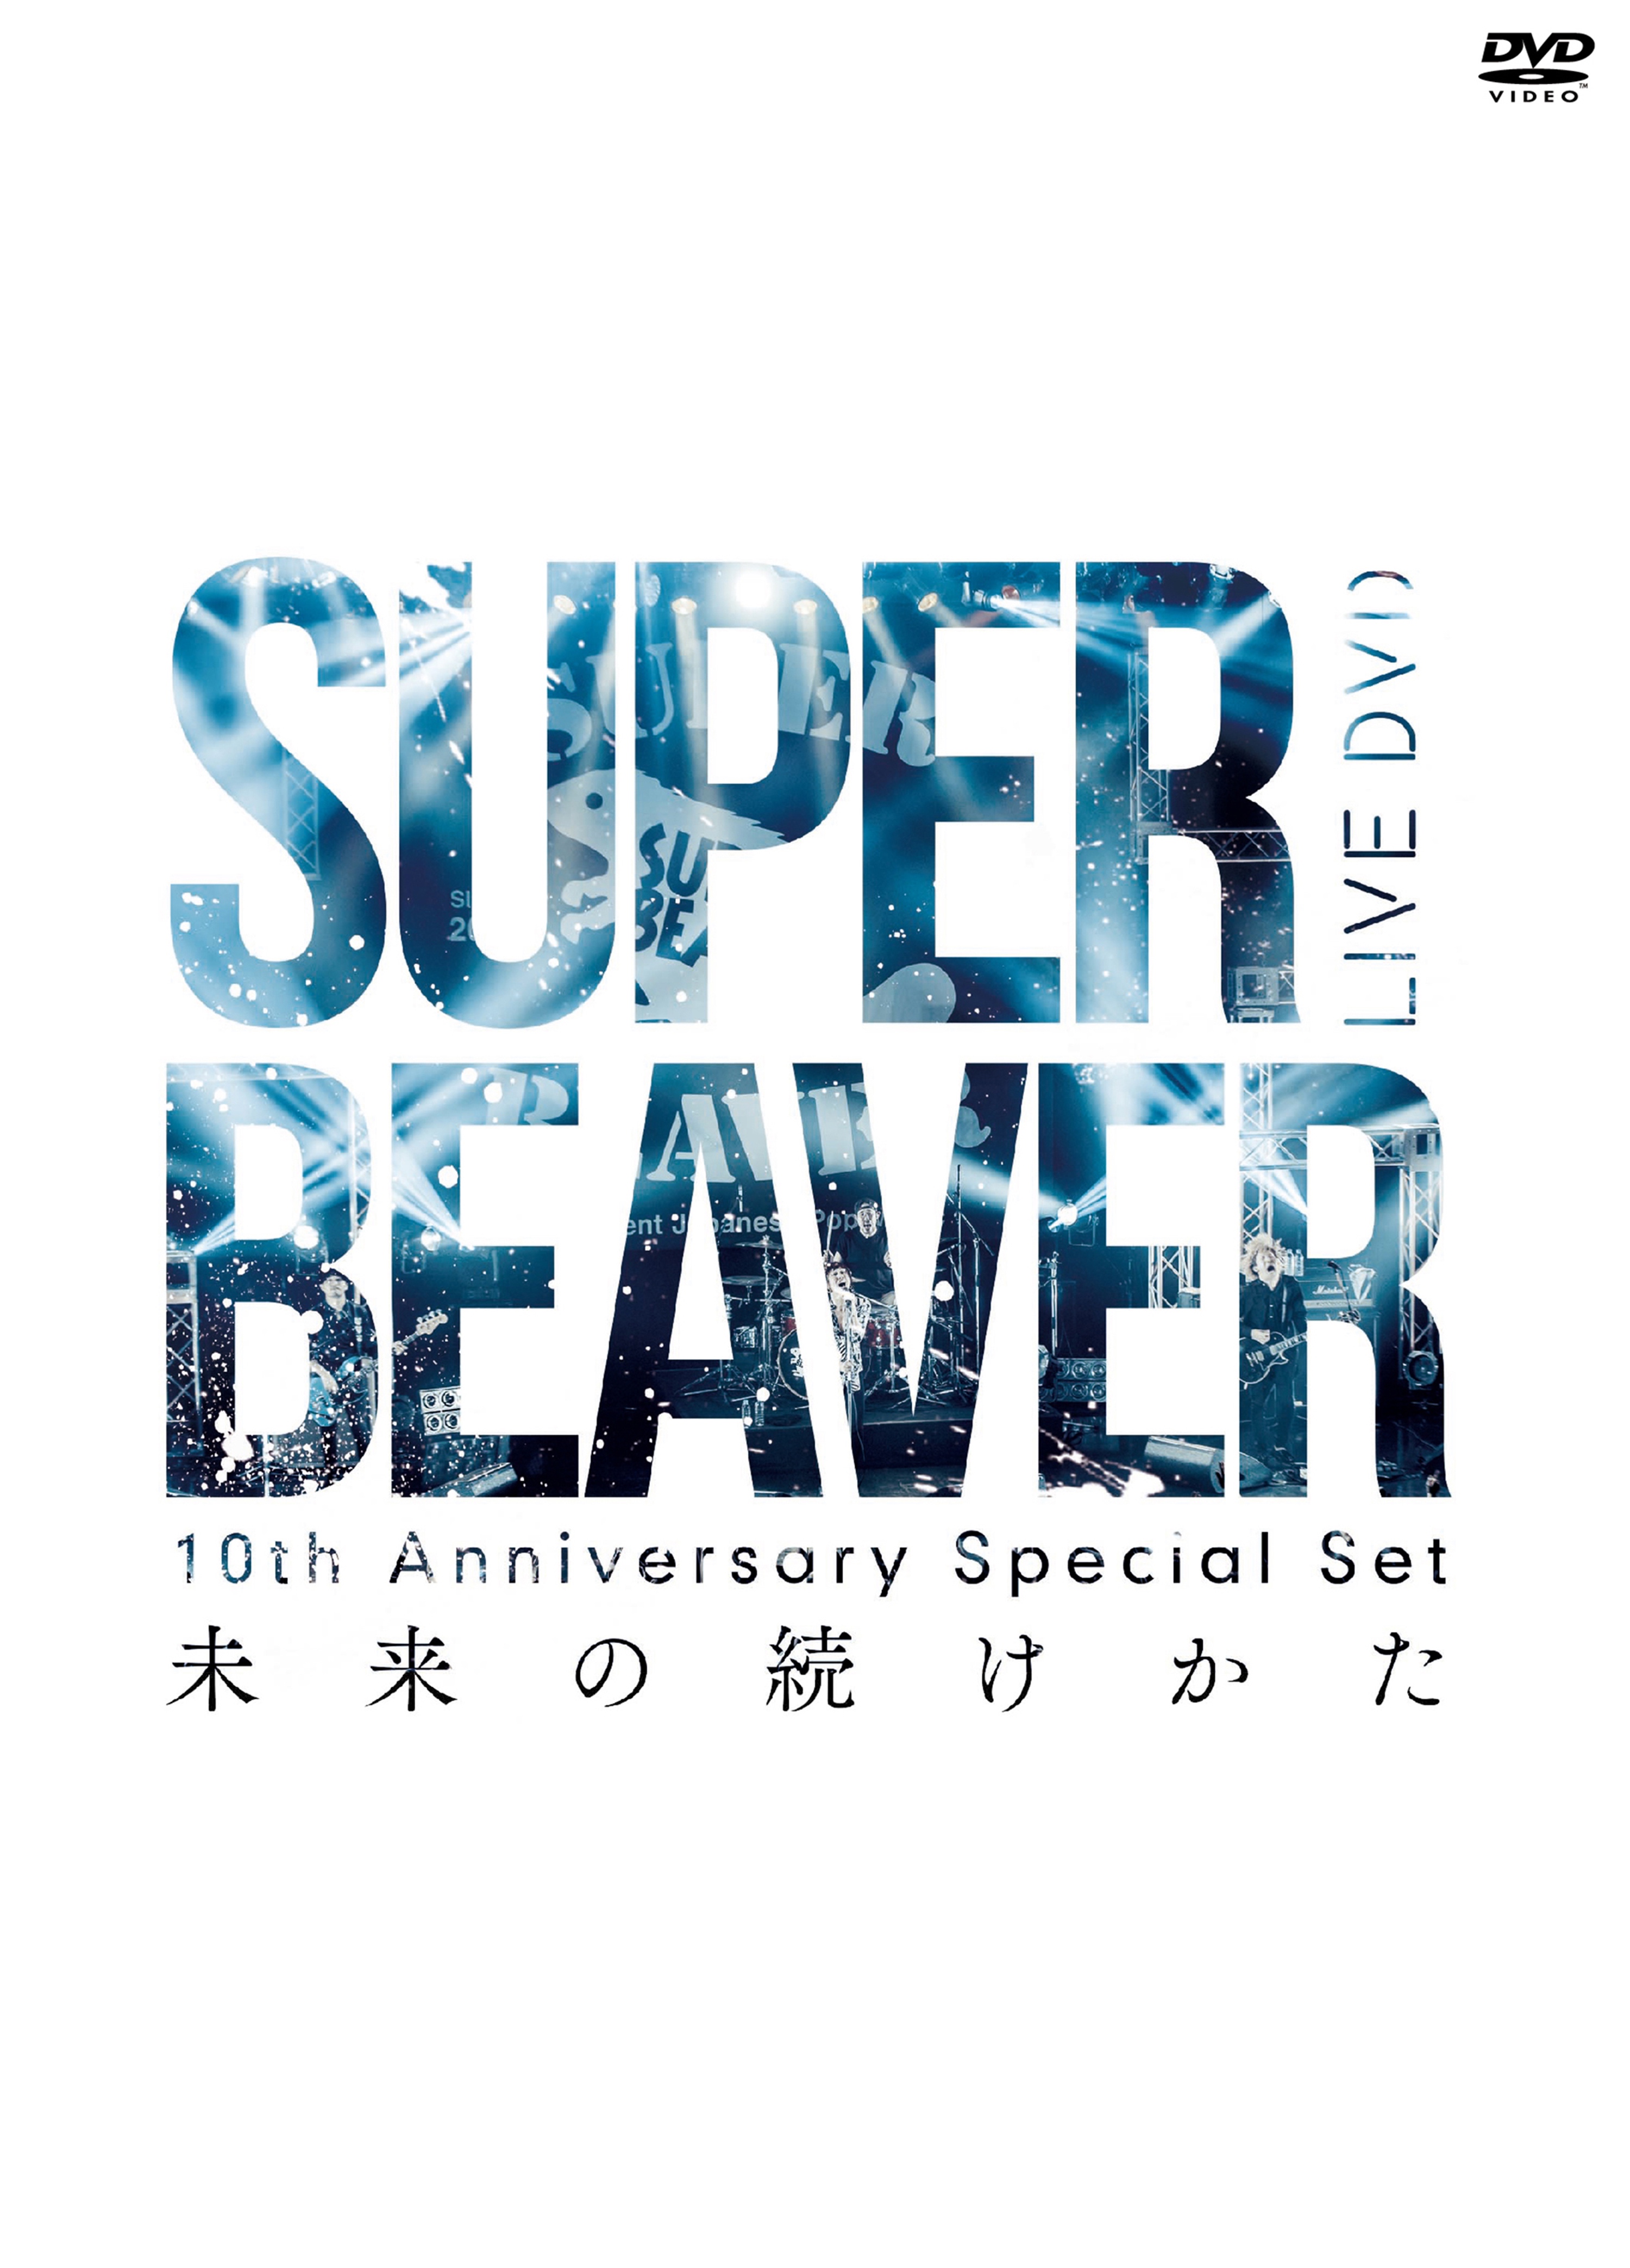 10th Anniversary Special Set「未来の続けかた」発売決定！！ | SUPER ...